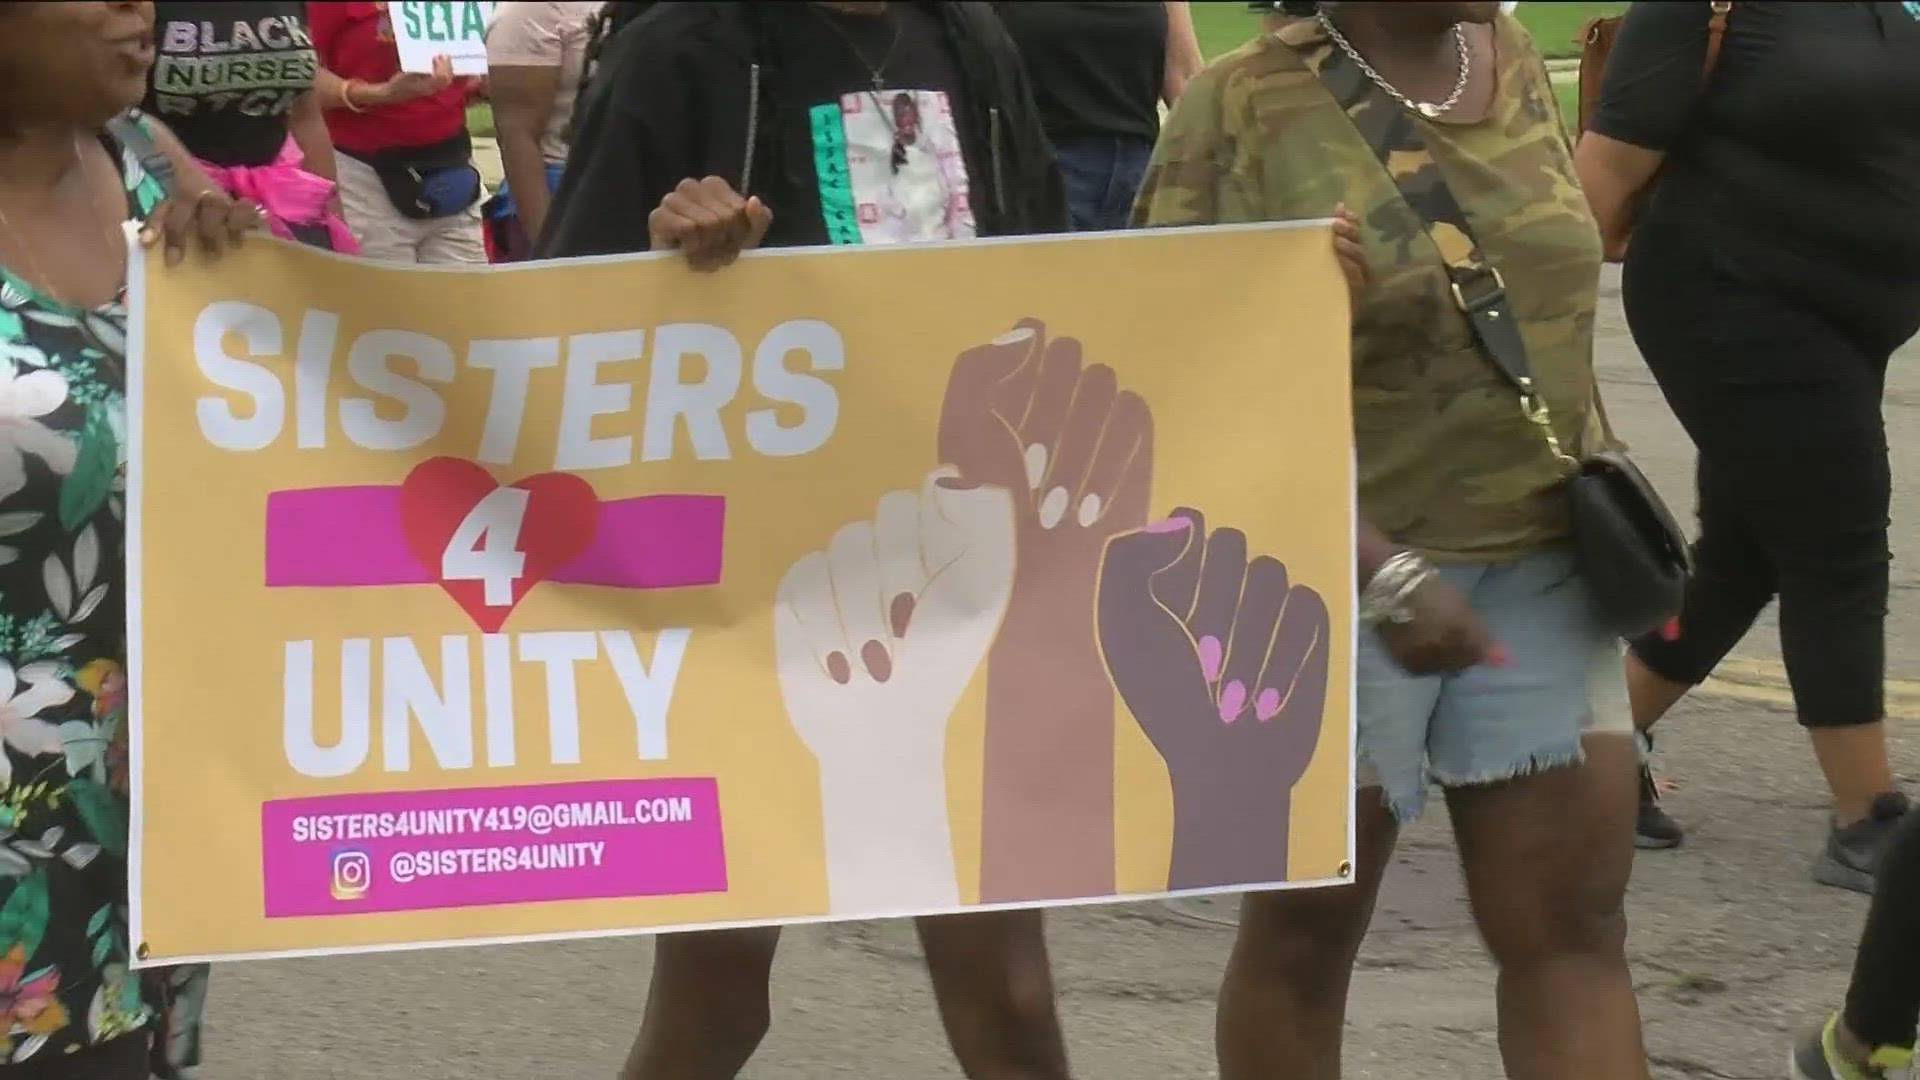 Sisters 4 Unity organized the march, which brought together current and former city leaders as well as a host of anti-gun violence organizations.